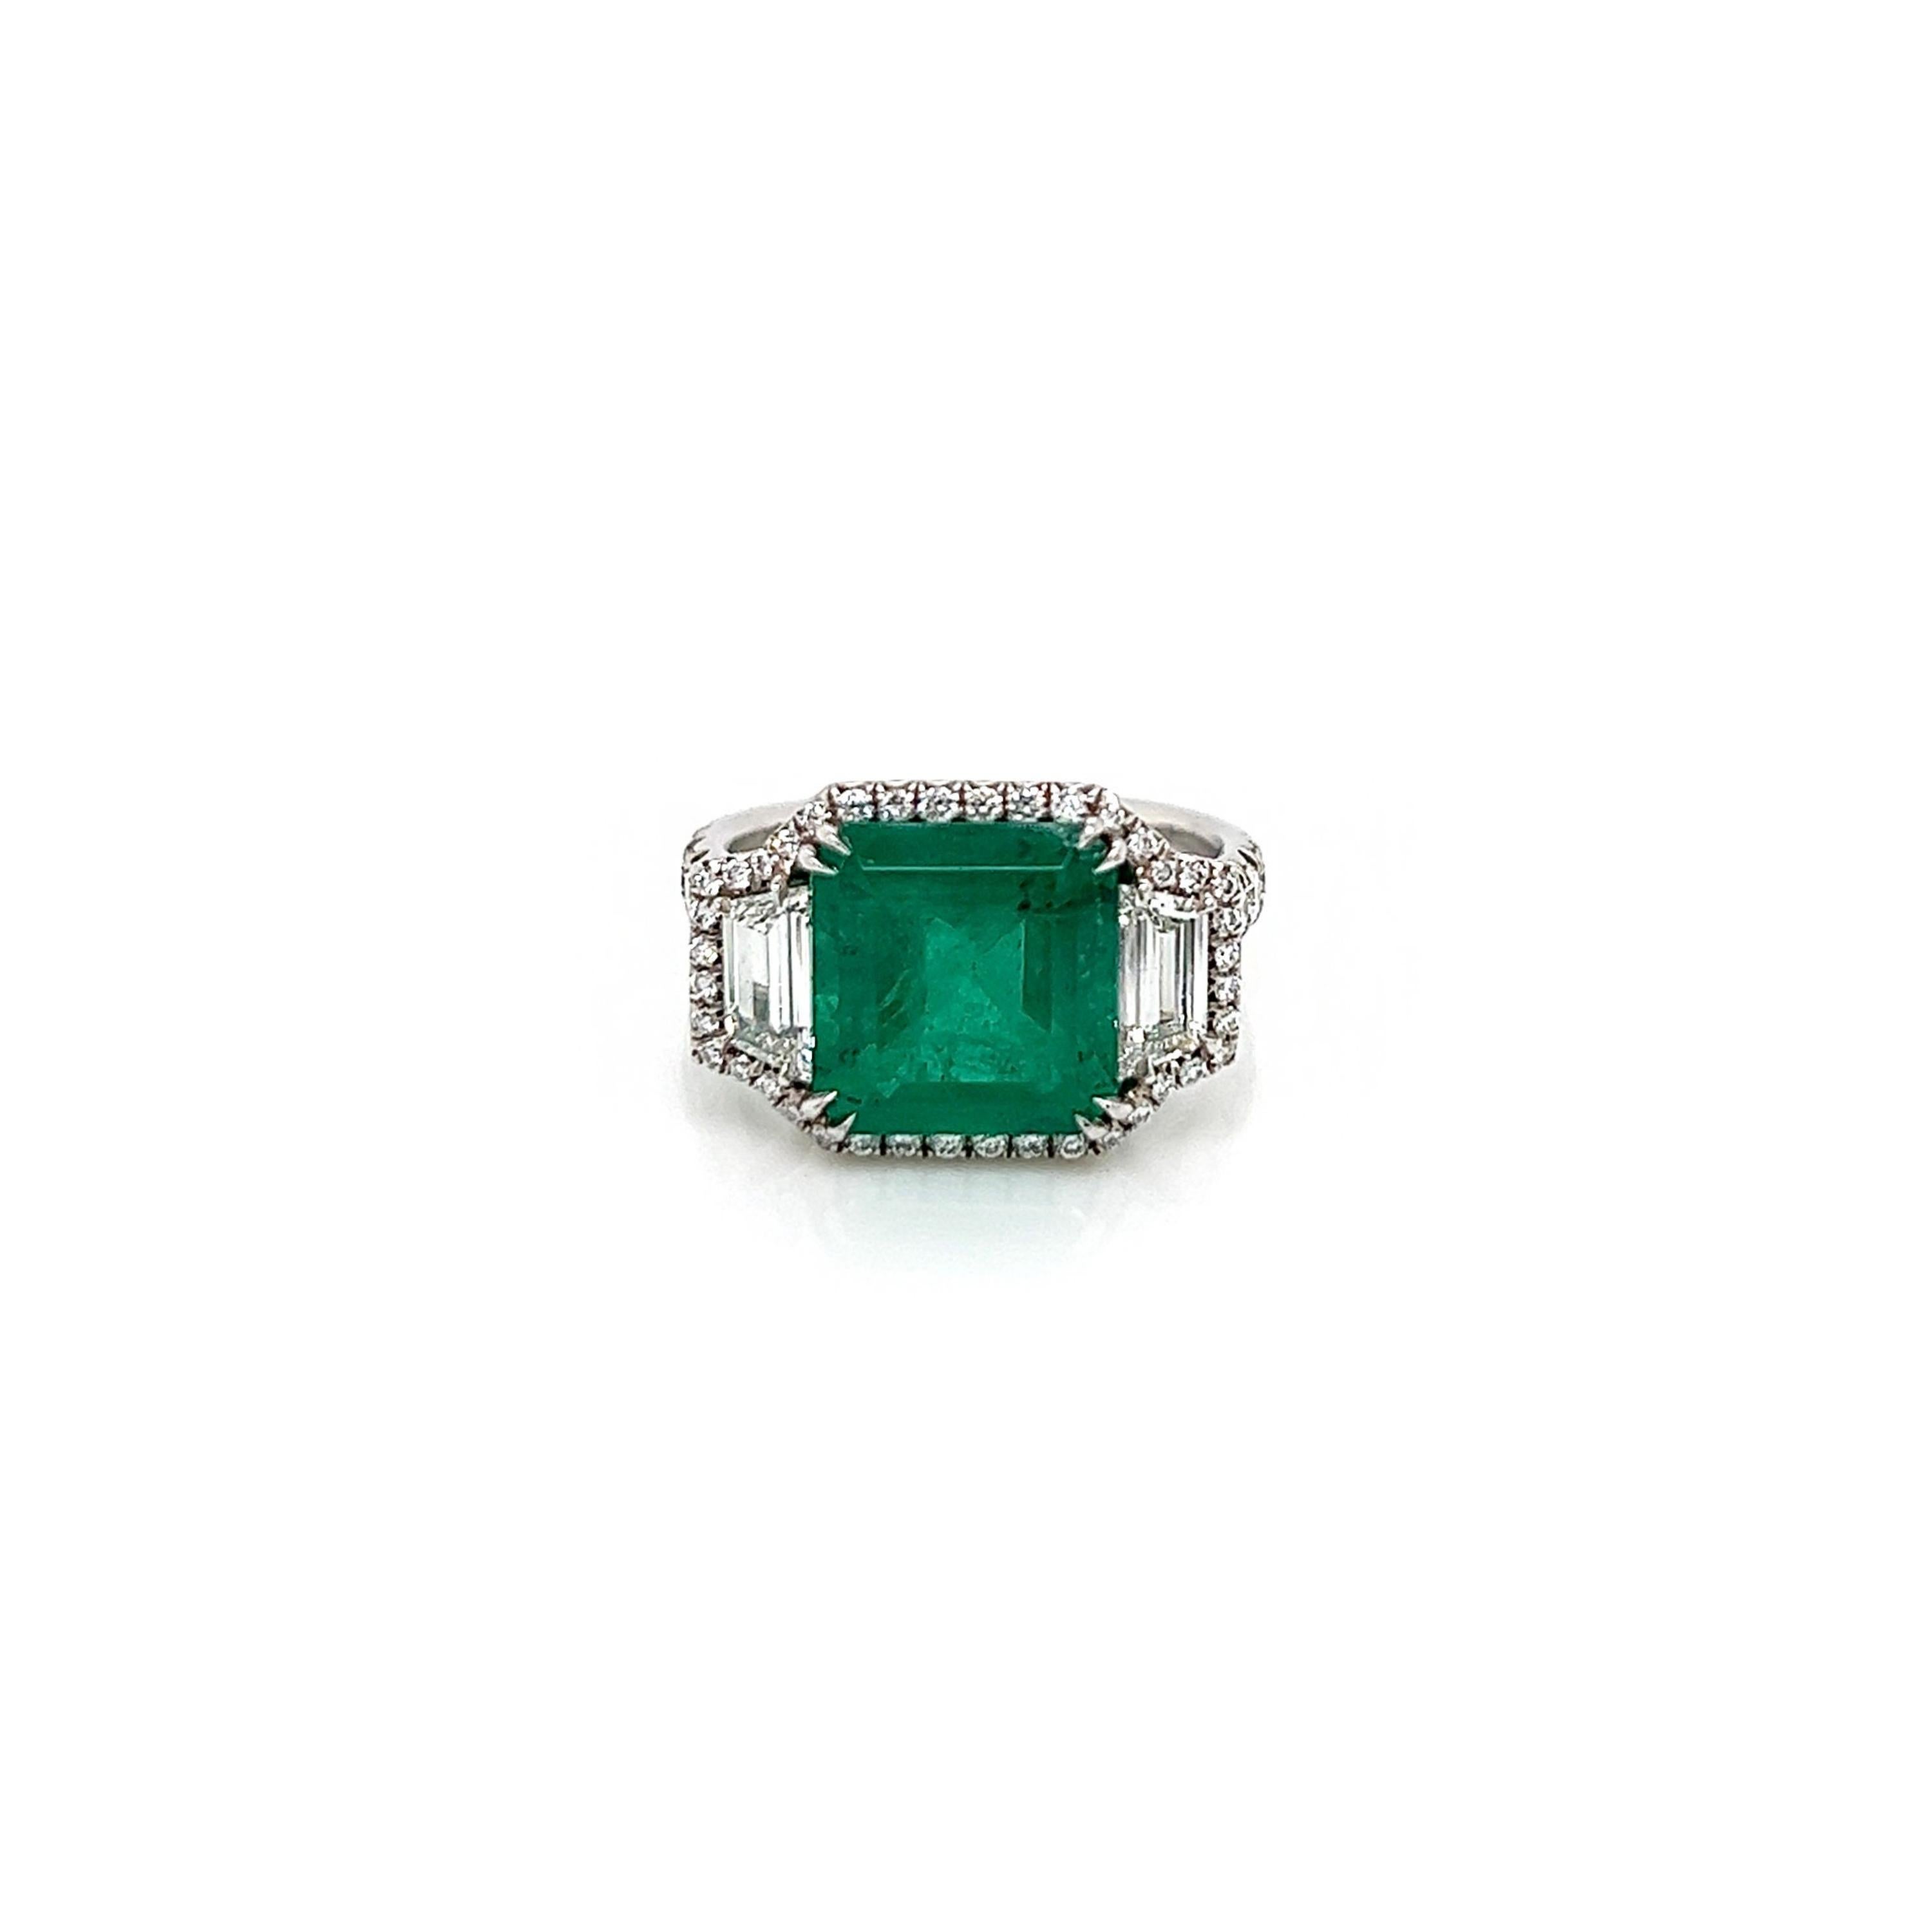 Women's Certified 3.91 Carat Natural Emerald Diamond Cocktail Ring Unique Diamond Ring For Sale